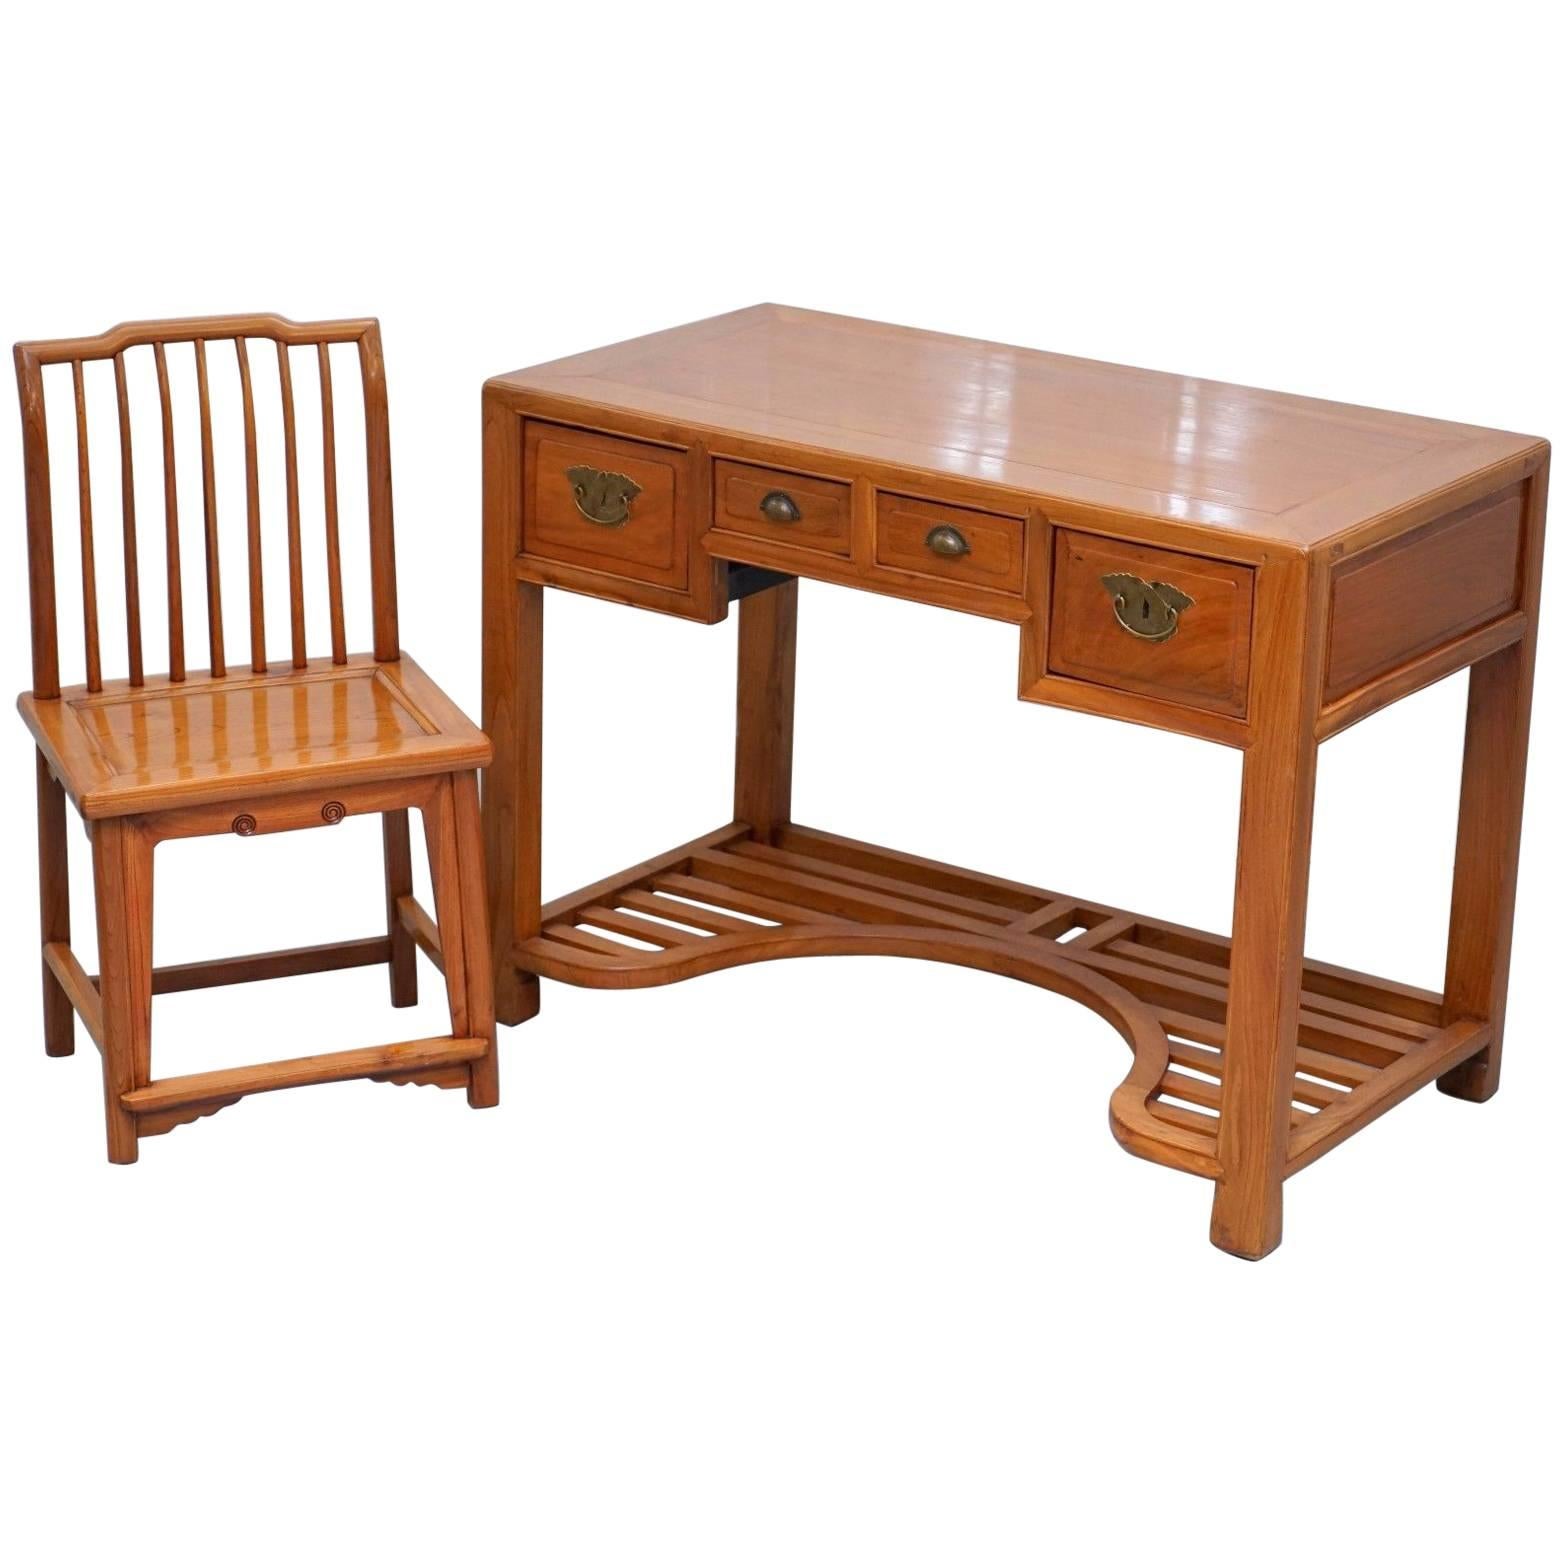 Vintage Chinese Ming Style Teak Desk and Matching Chair Lovely Rare Pair Office